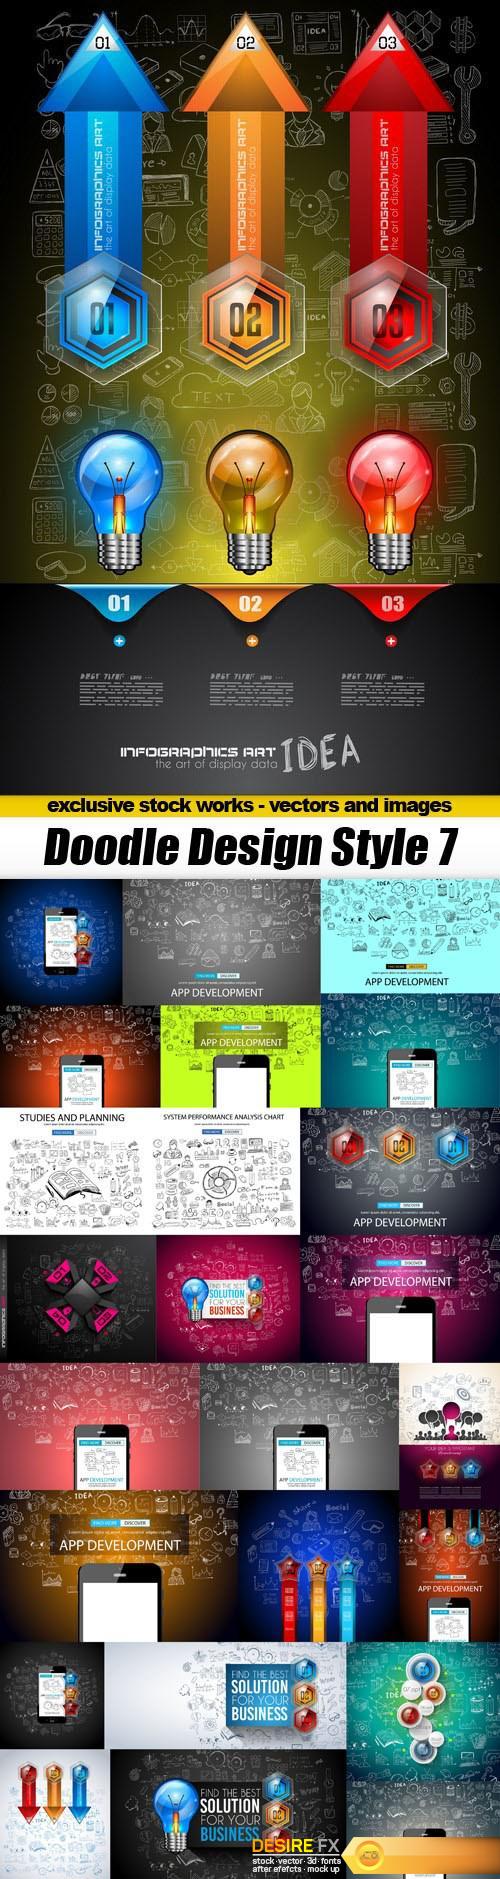 Doodle Design Style 7 - 25xEPS